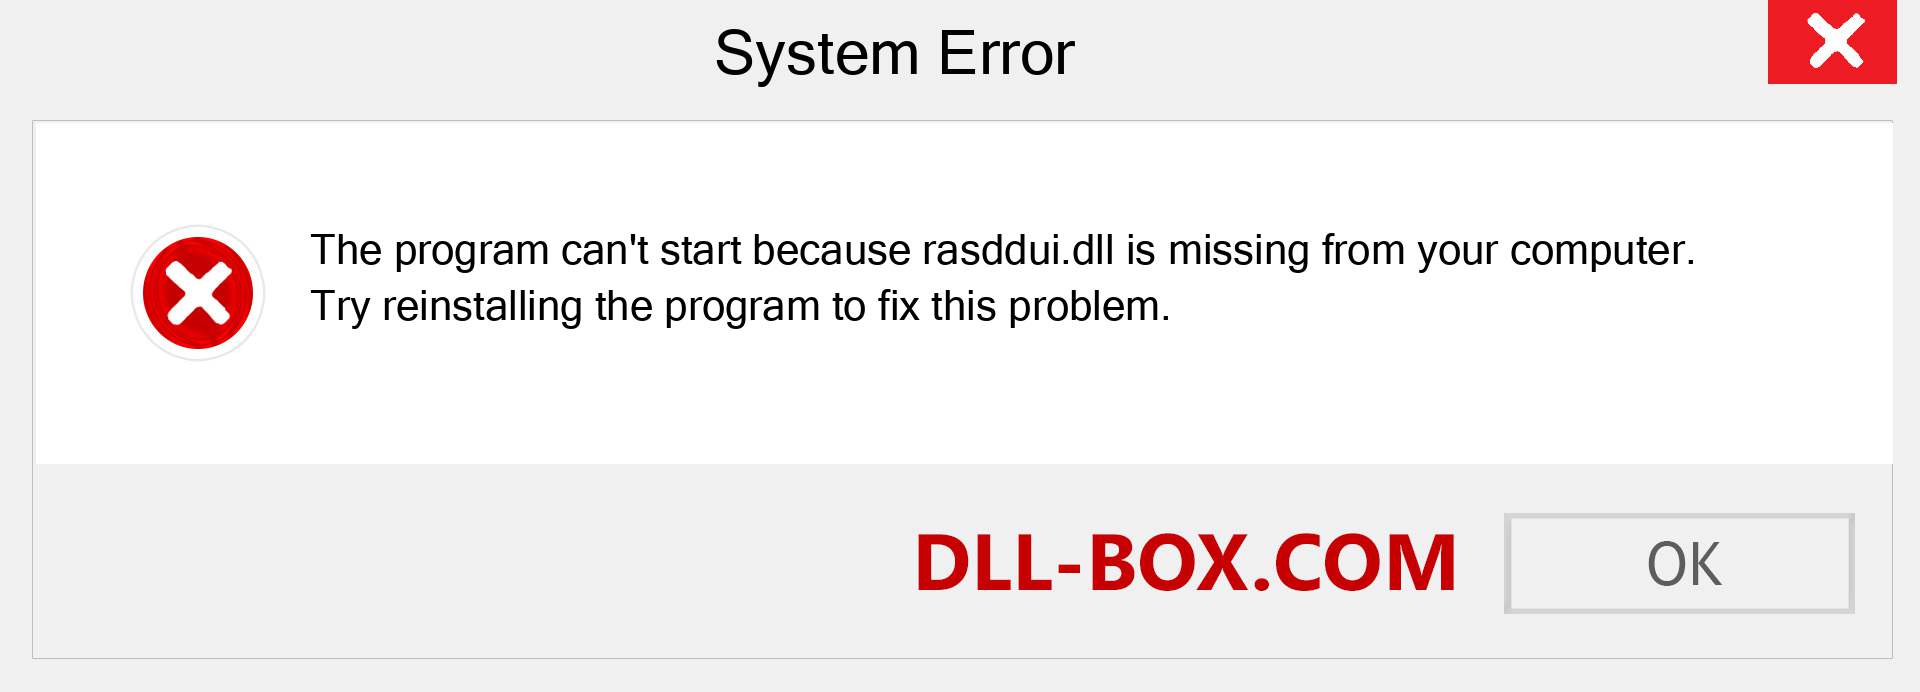  rasddui.dll file is missing?. Download for Windows 7, 8, 10 - Fix  rasddui dll Missing Error on Windows, photos, images